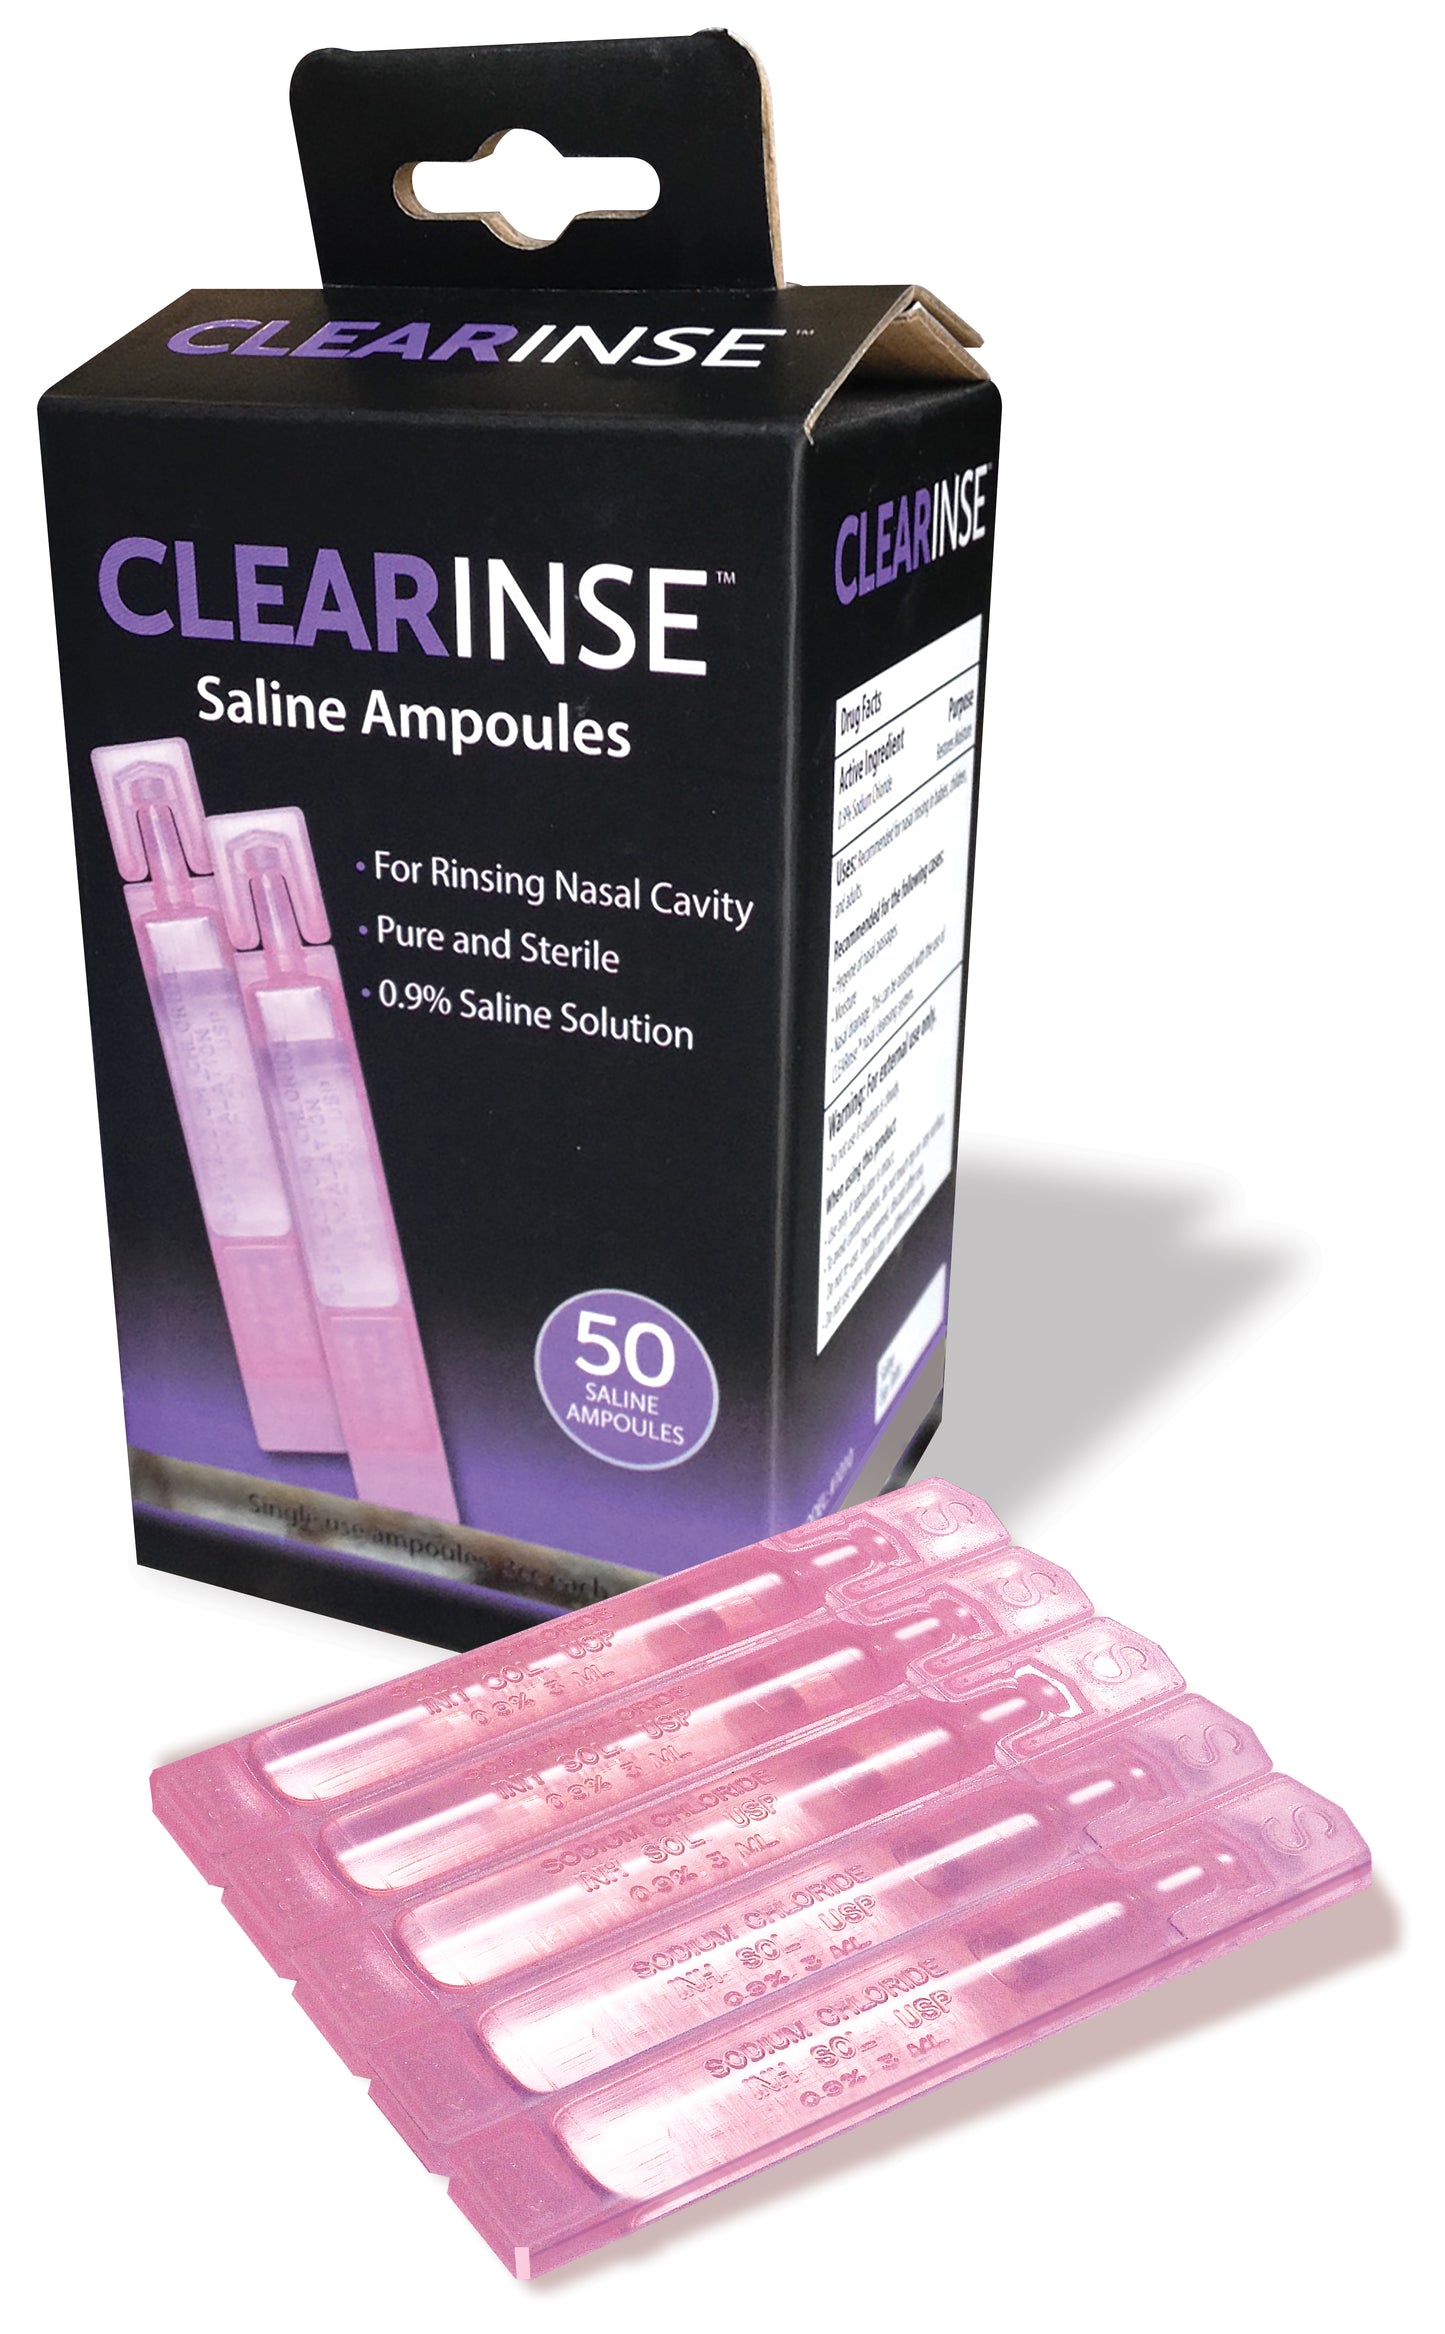 CLEARinse Saline Solution – 50 Count Box of Ampoules